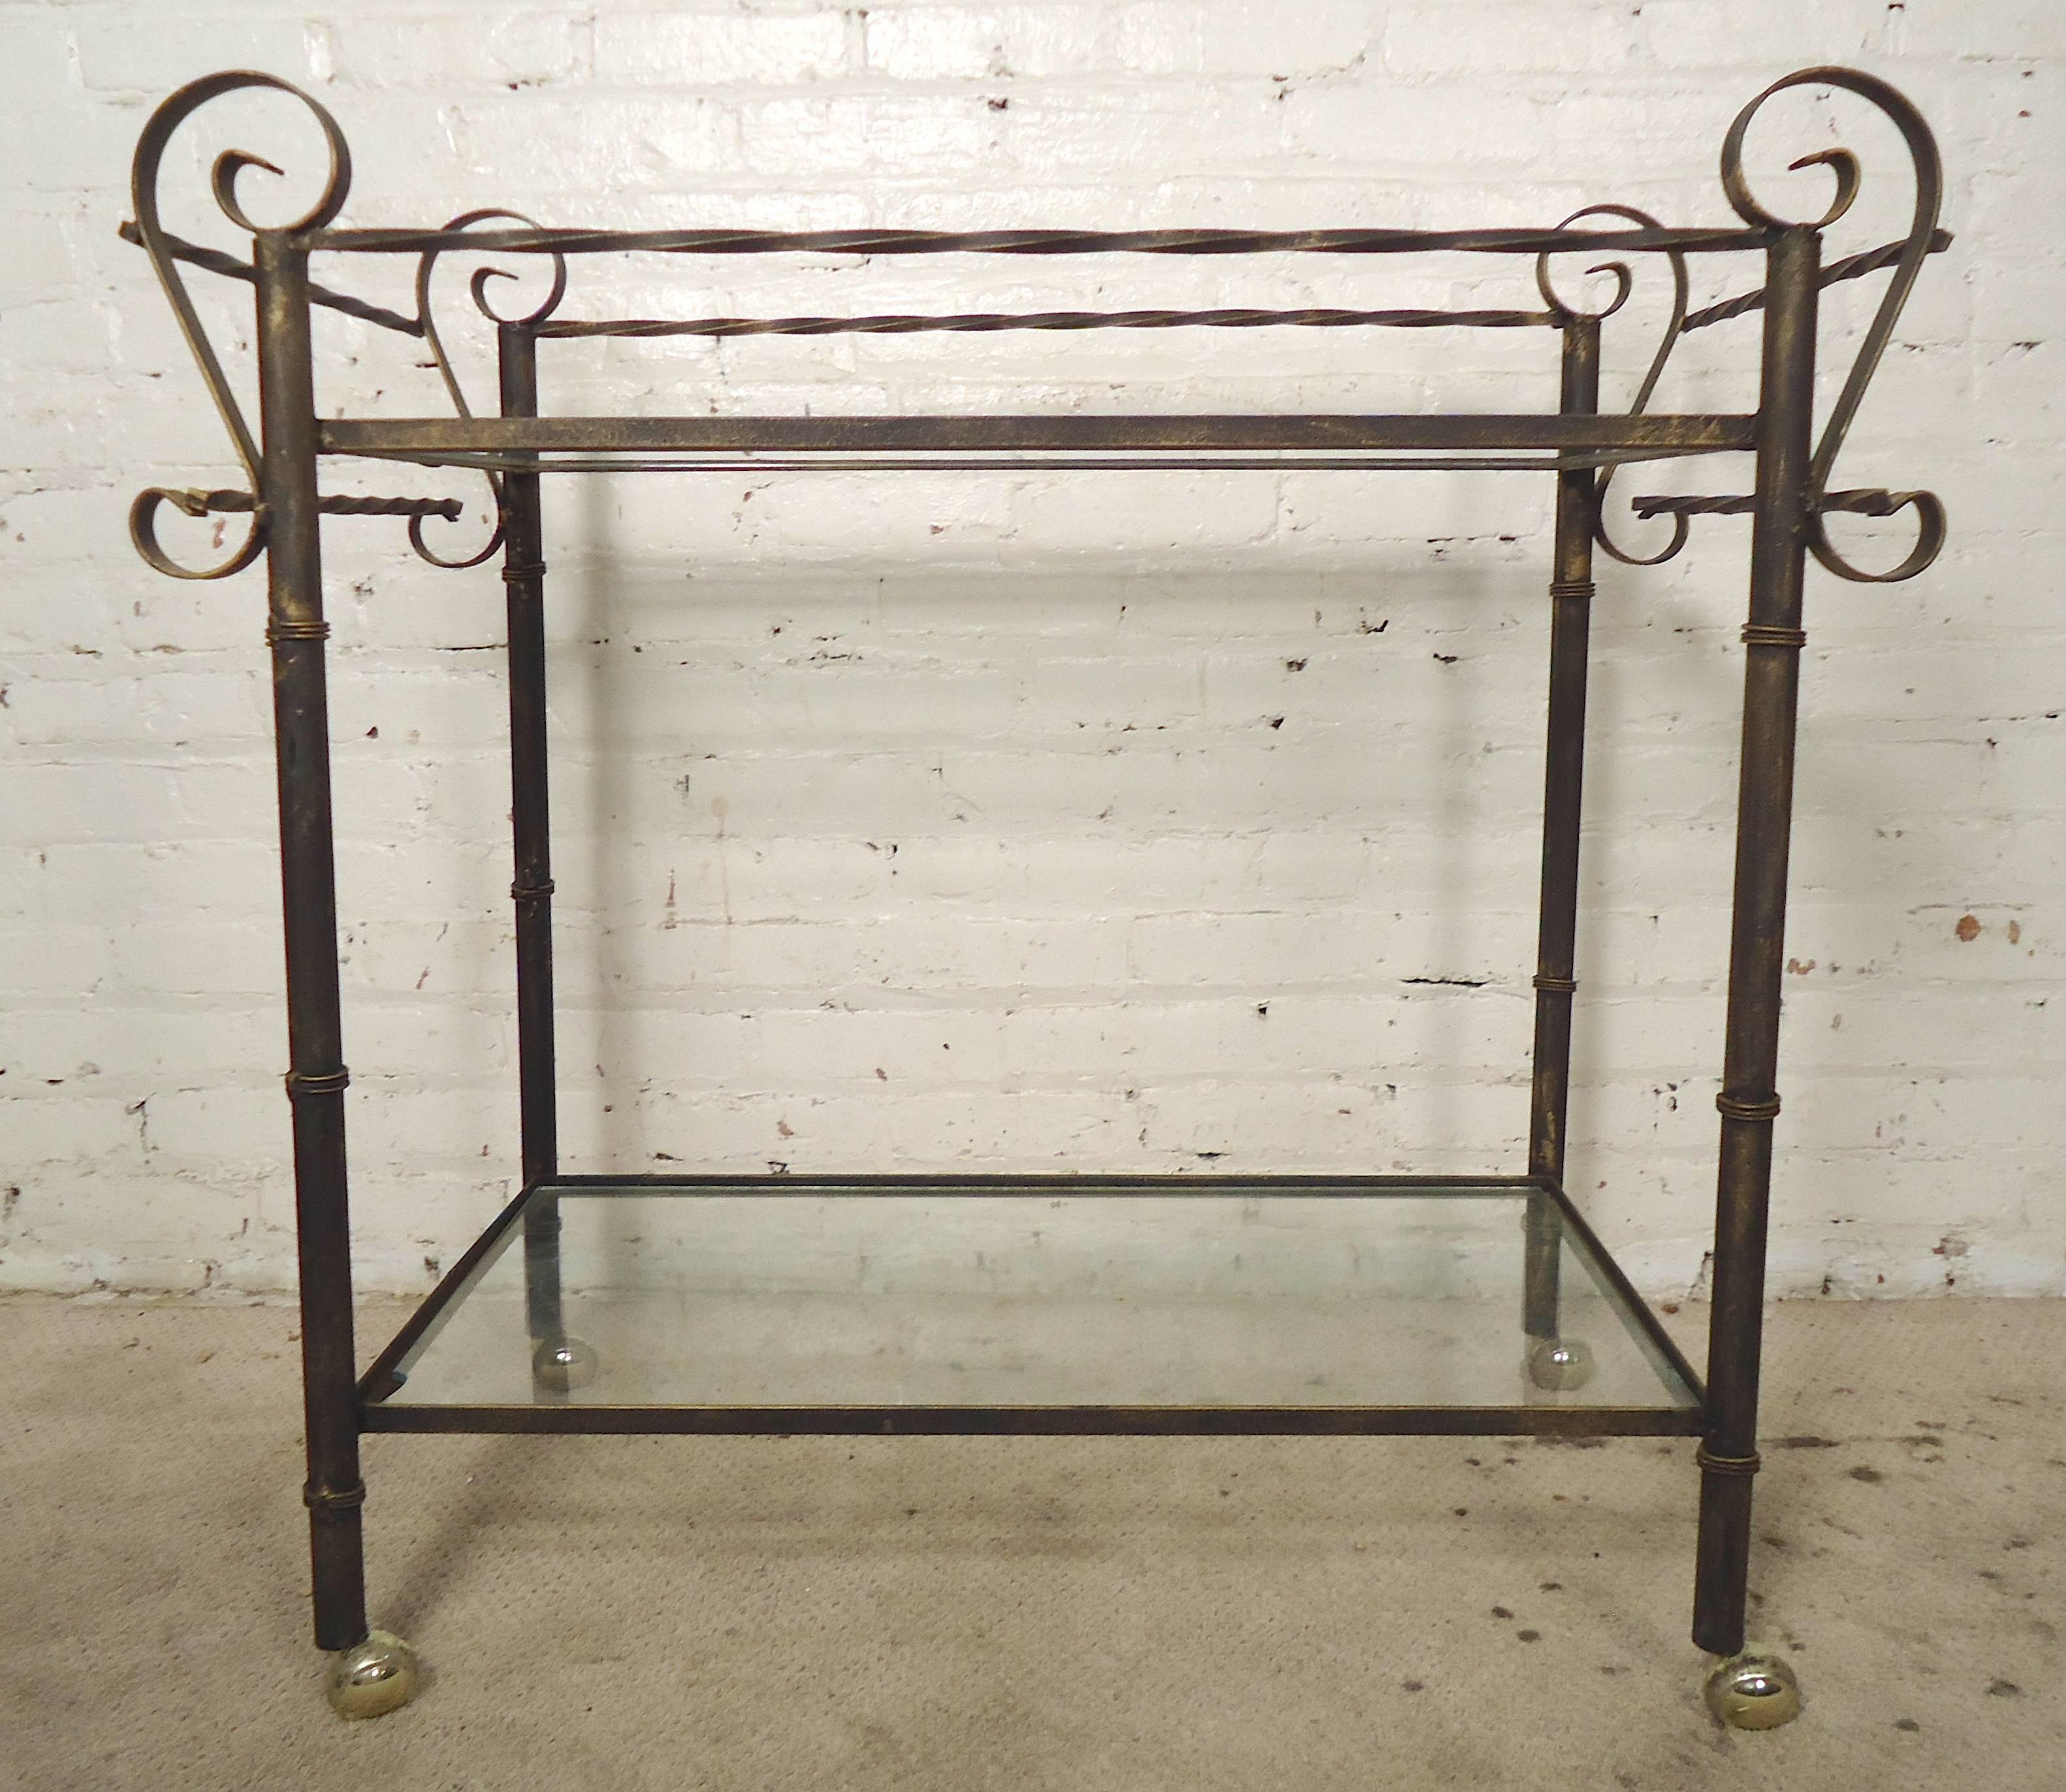 Two level iron cart with scrolled arms and twisting iron rails. Metal has a nice aged patina look, two glass shelves and full rolling casters.

(Please confirm item location - NY or NJ - with dealer)
